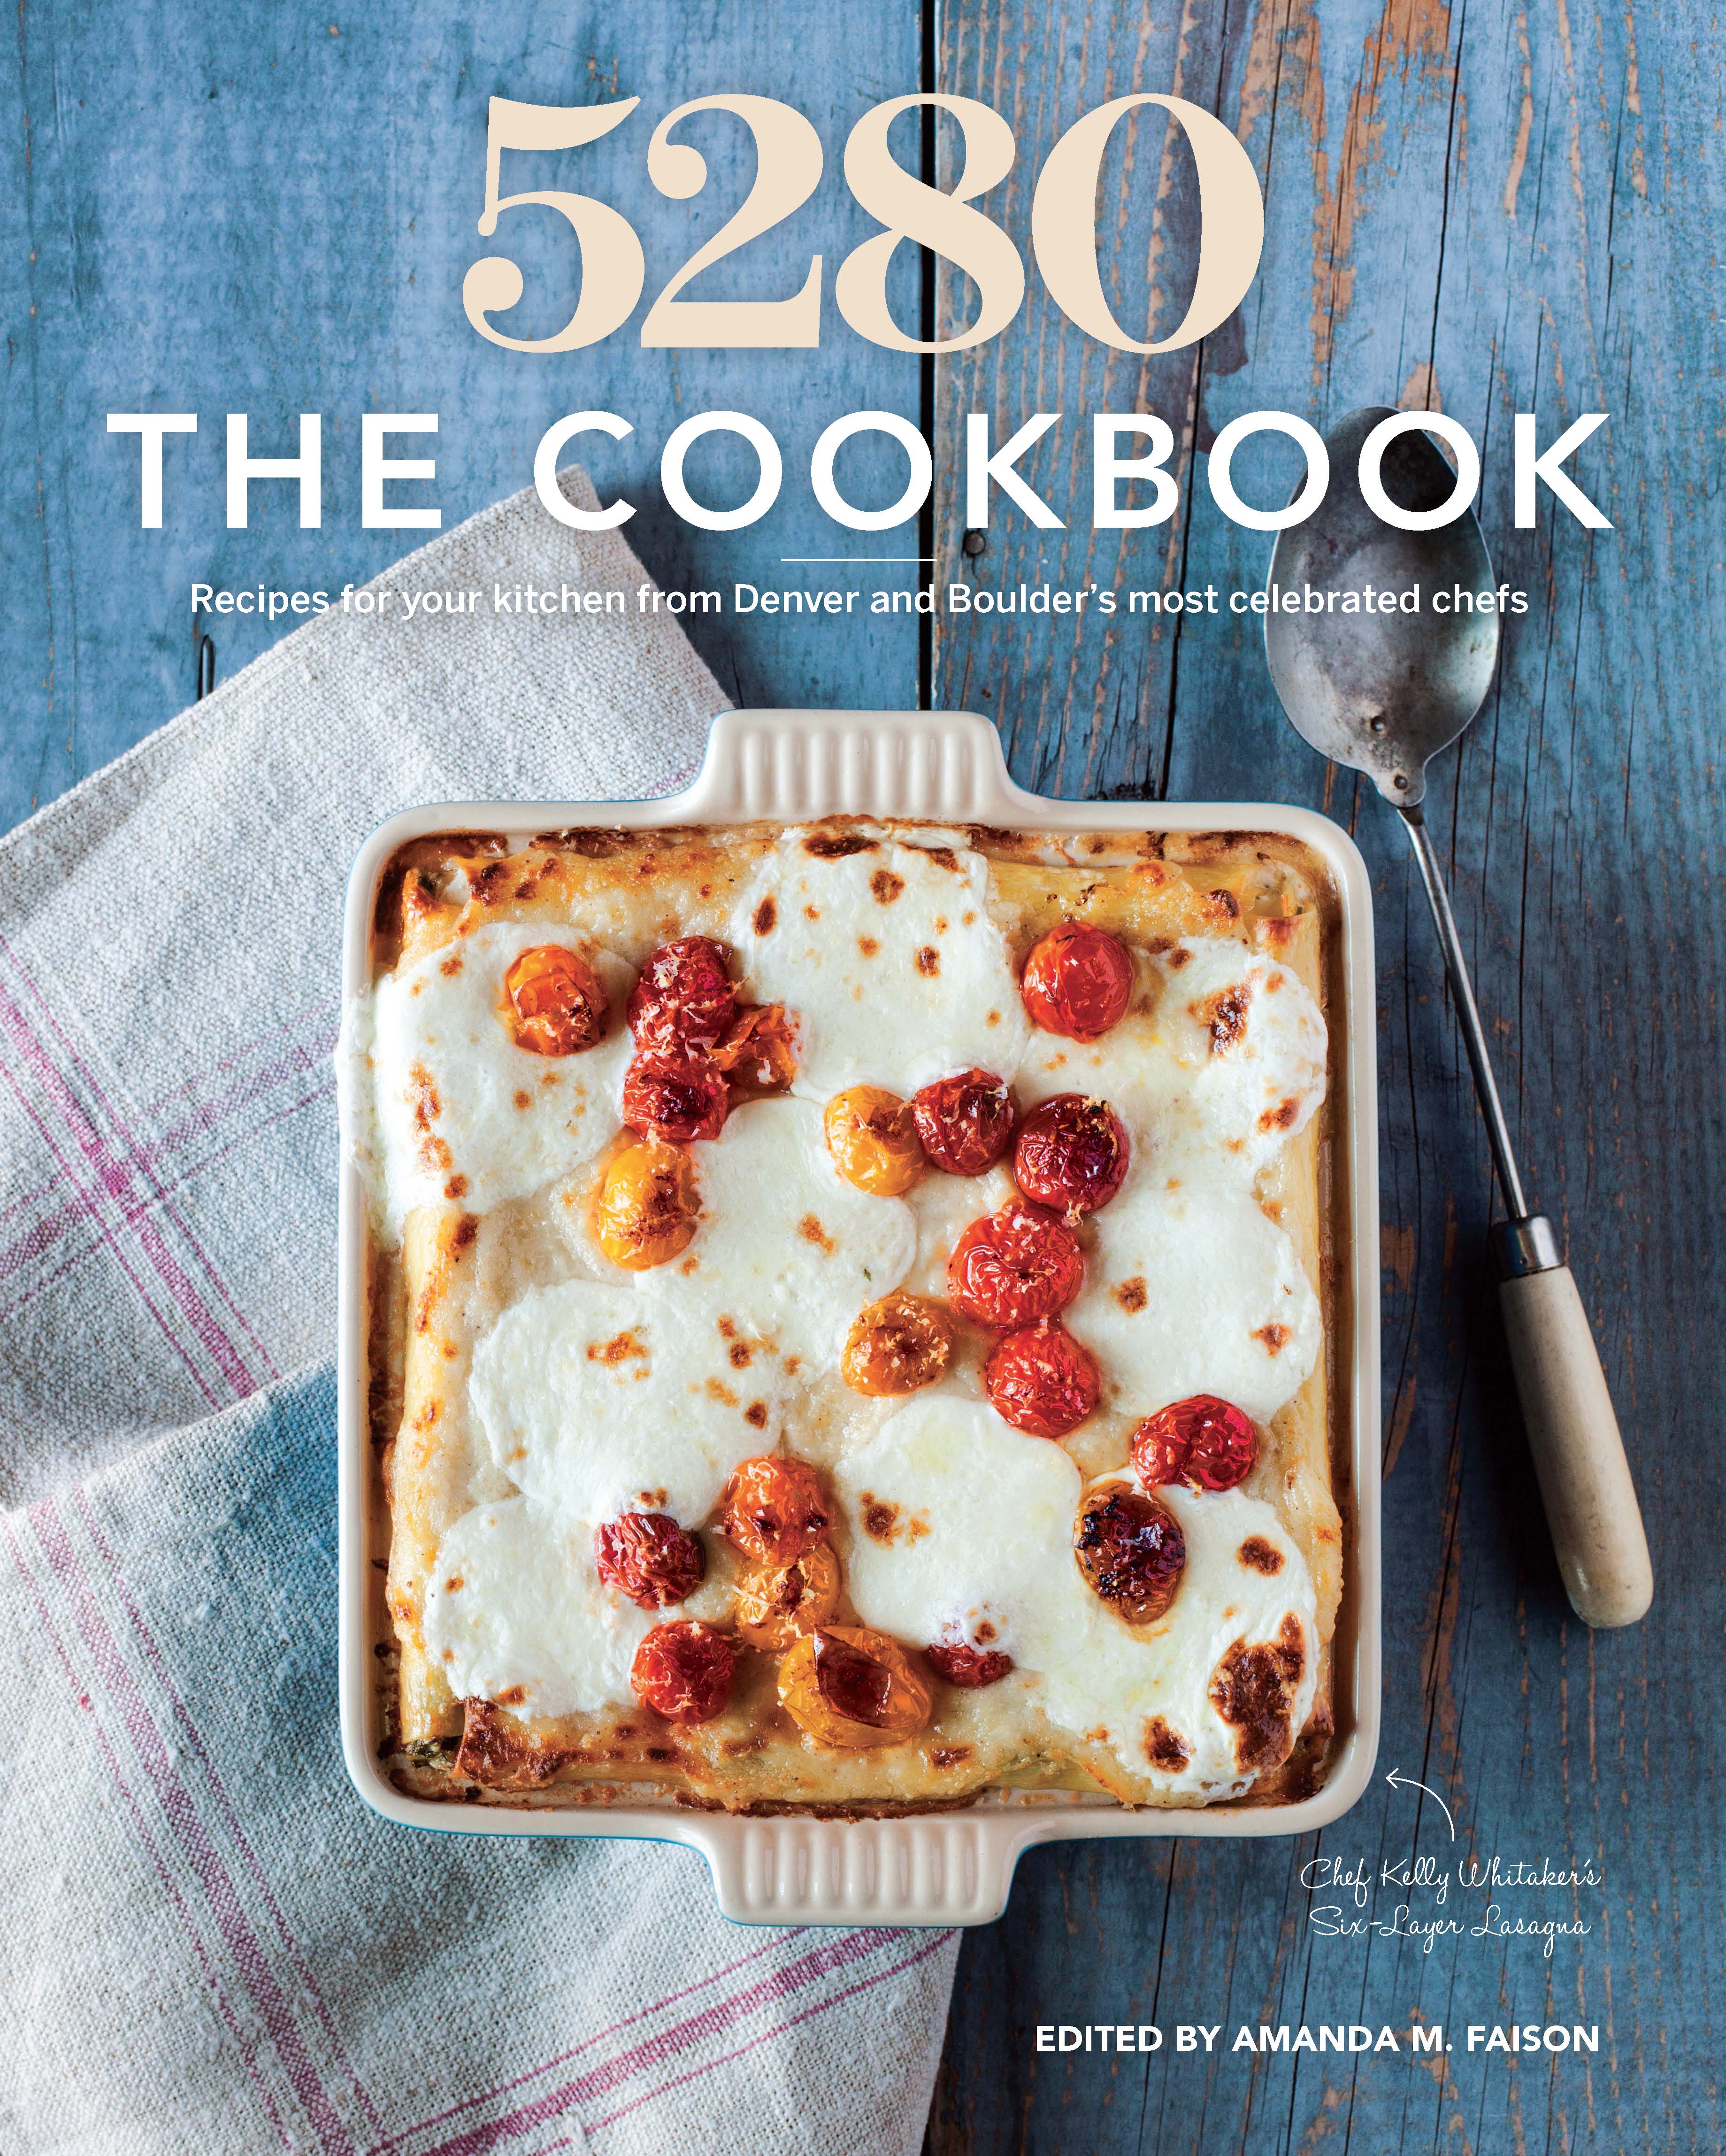 Colorado Matters at the tattered: 5280 the cookbook